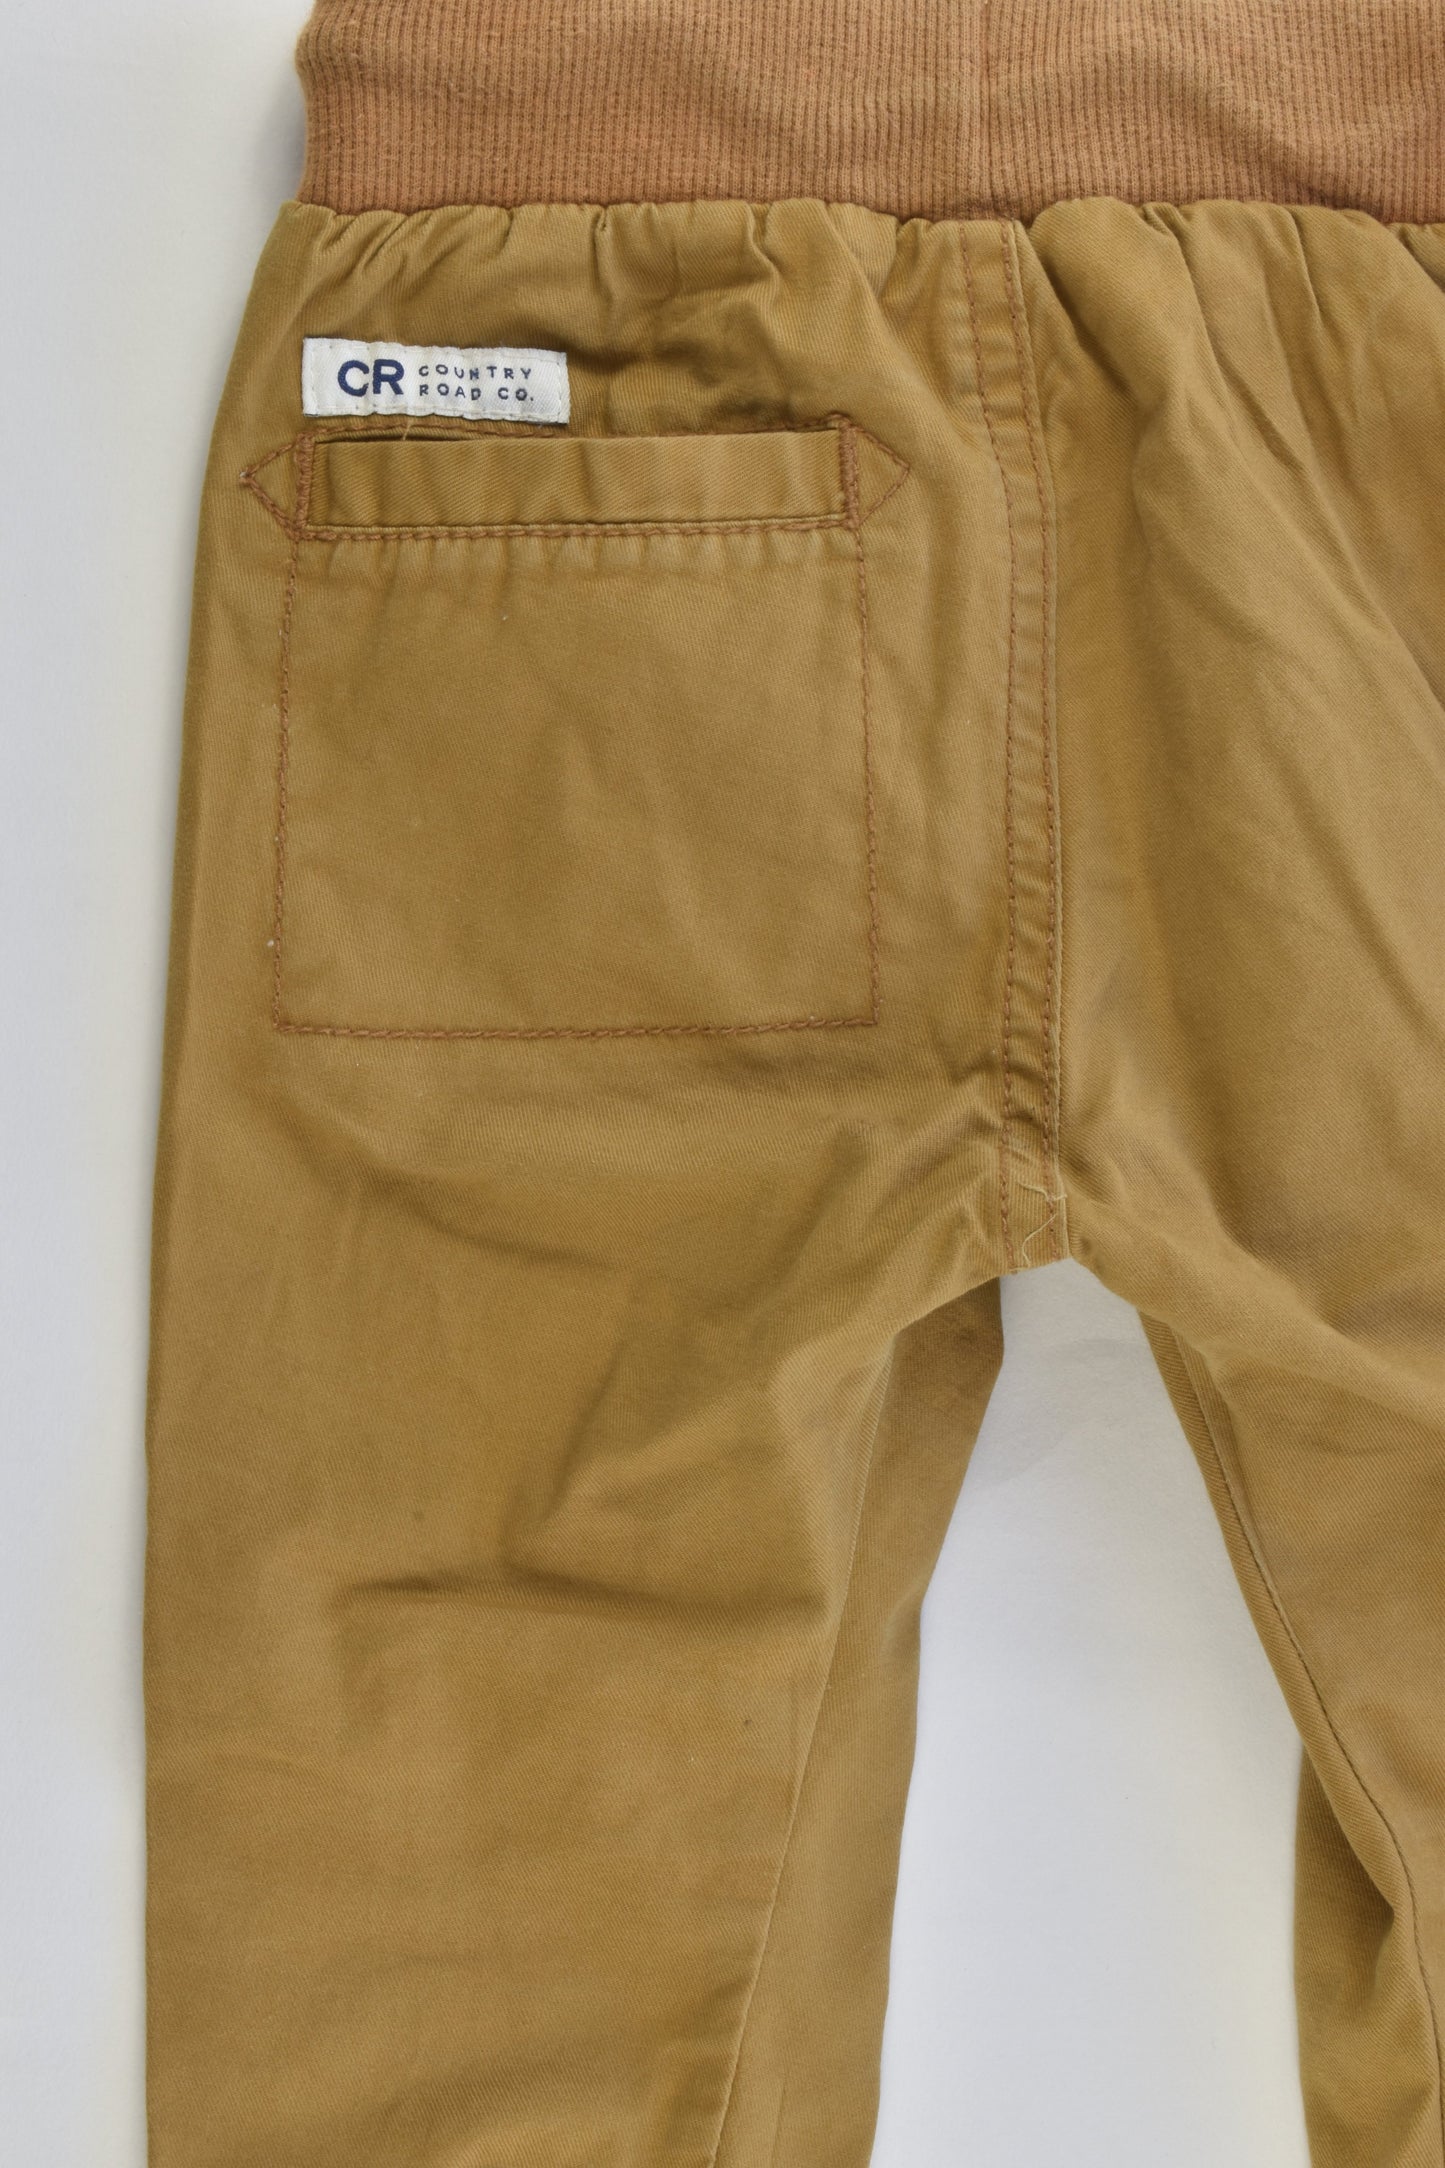 Country Road Size 0 (6-12 months) Pants